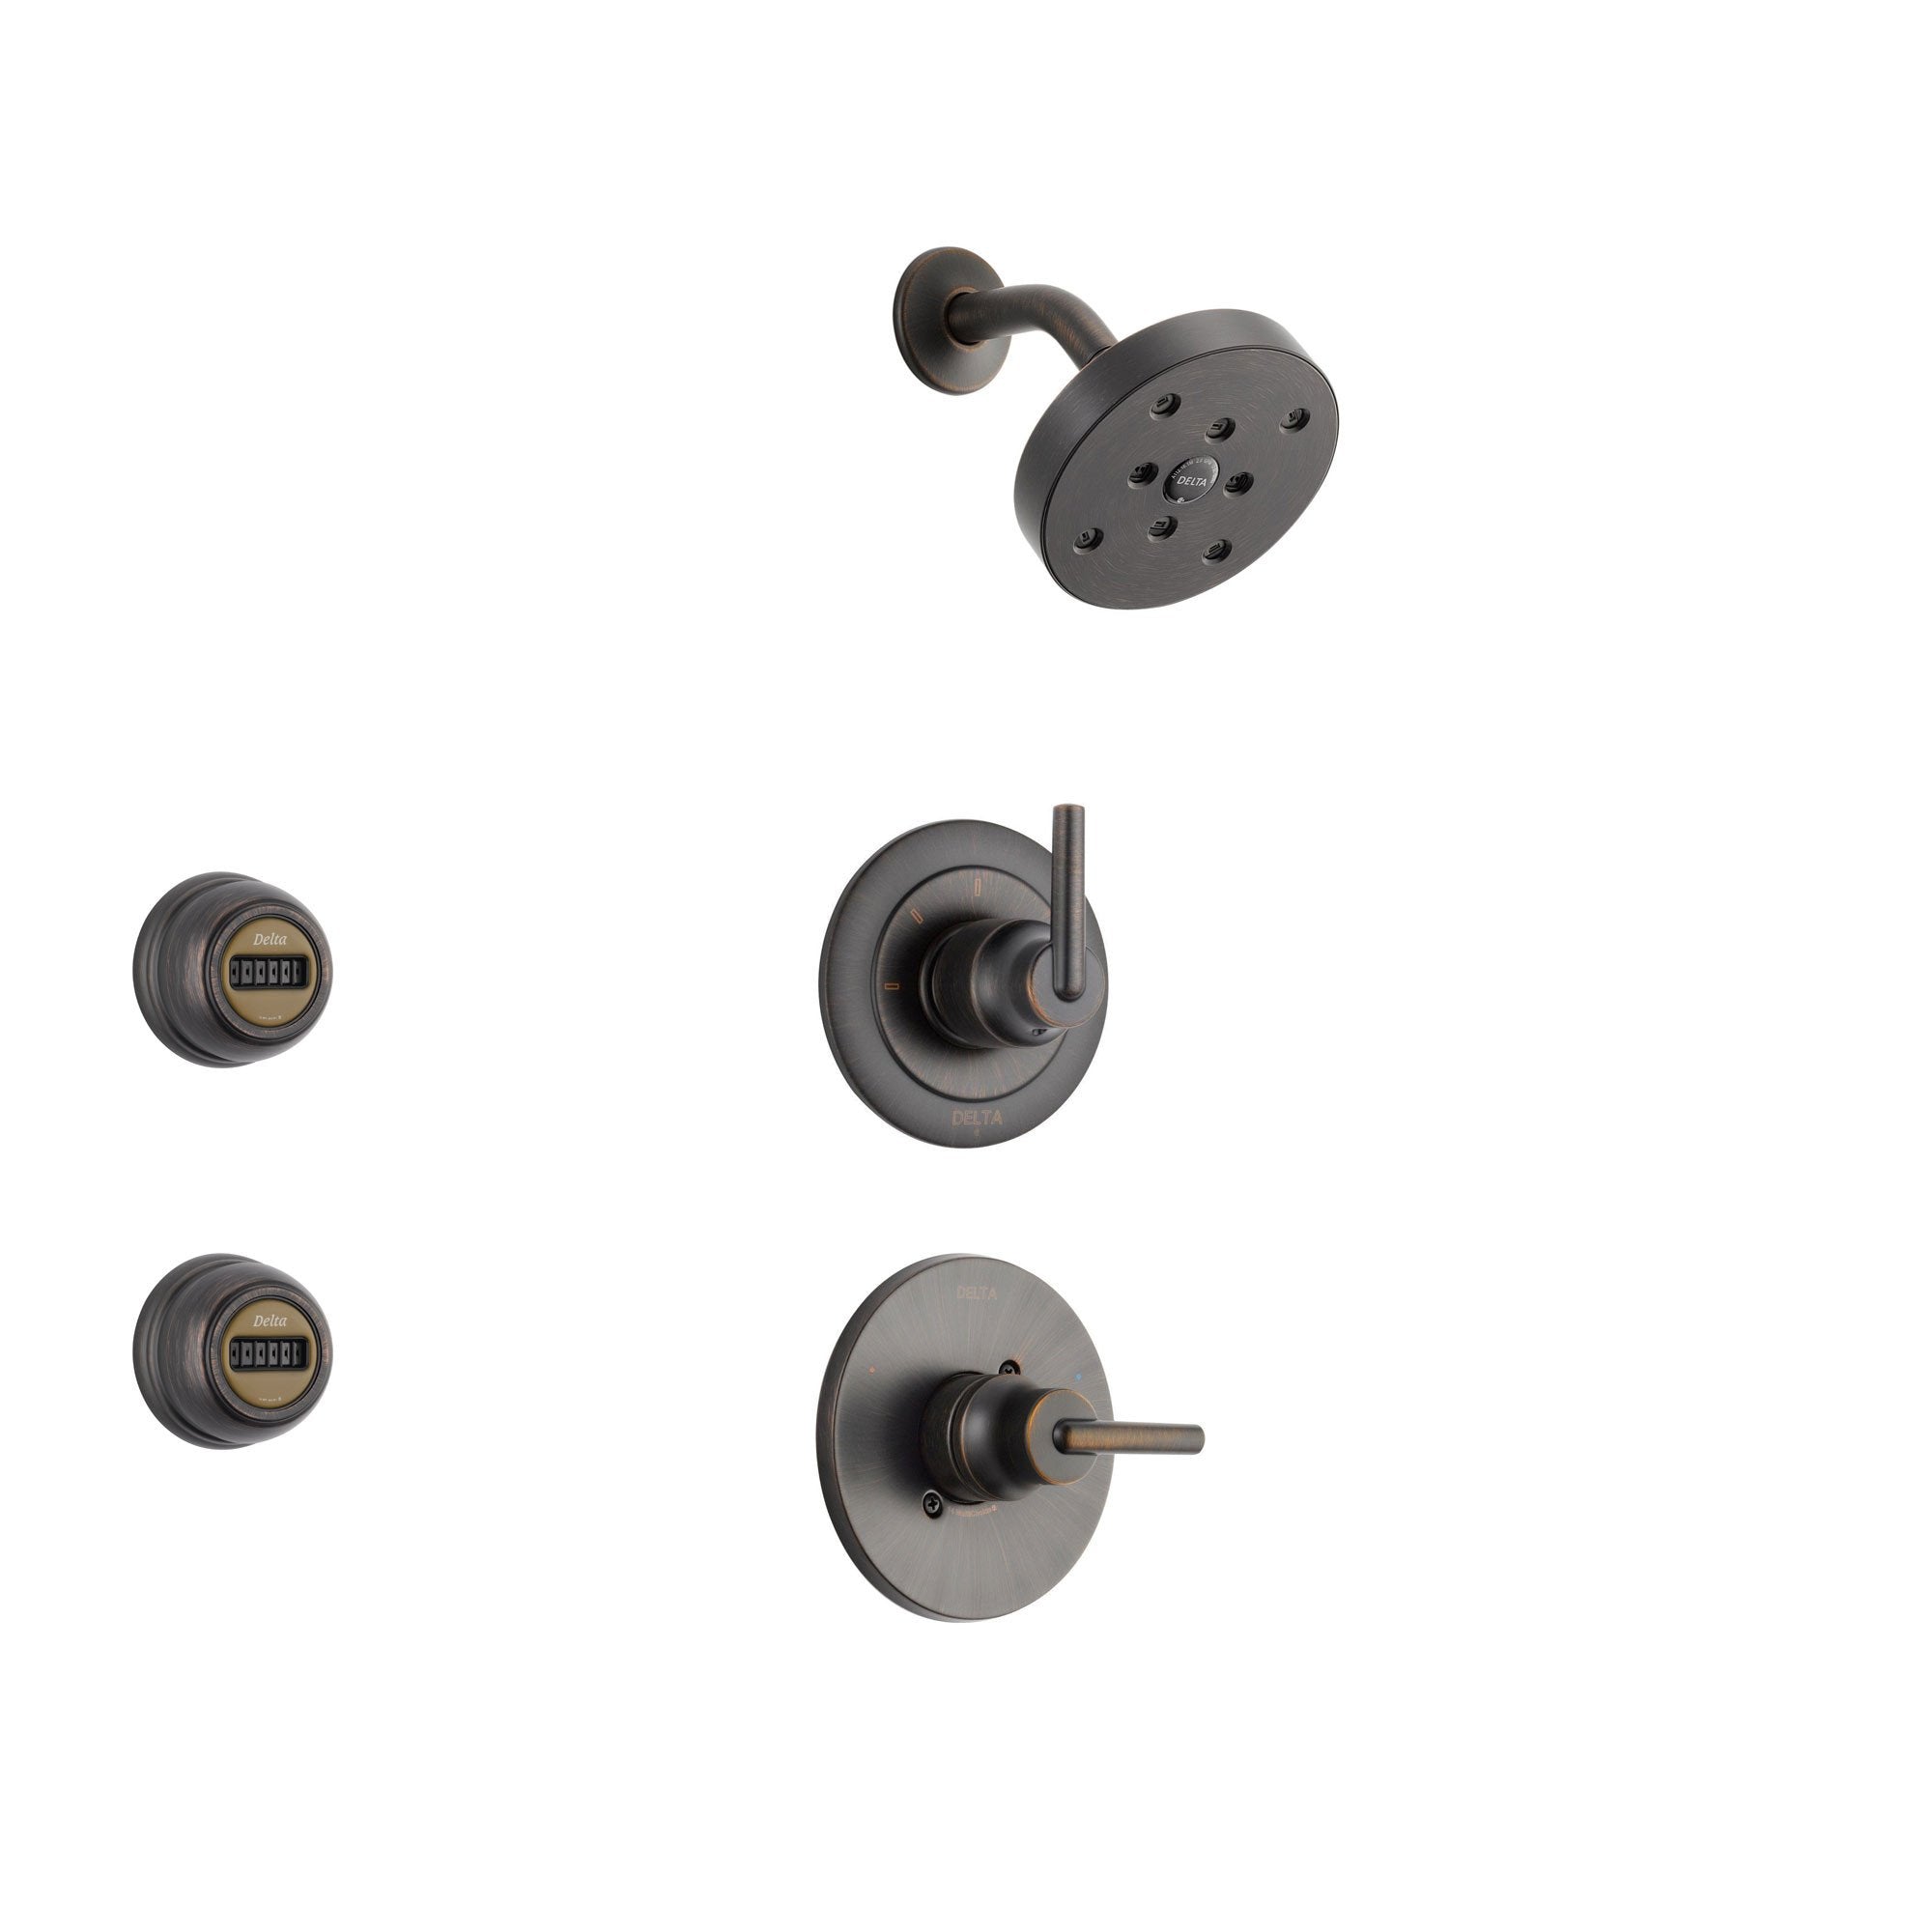 Delta Trinsic Venetian Bronze Shower System with Normal Shower Handle, 3-setting Diverter, Modern Round Showerhead, and 2 Body Sprays SS145983RB